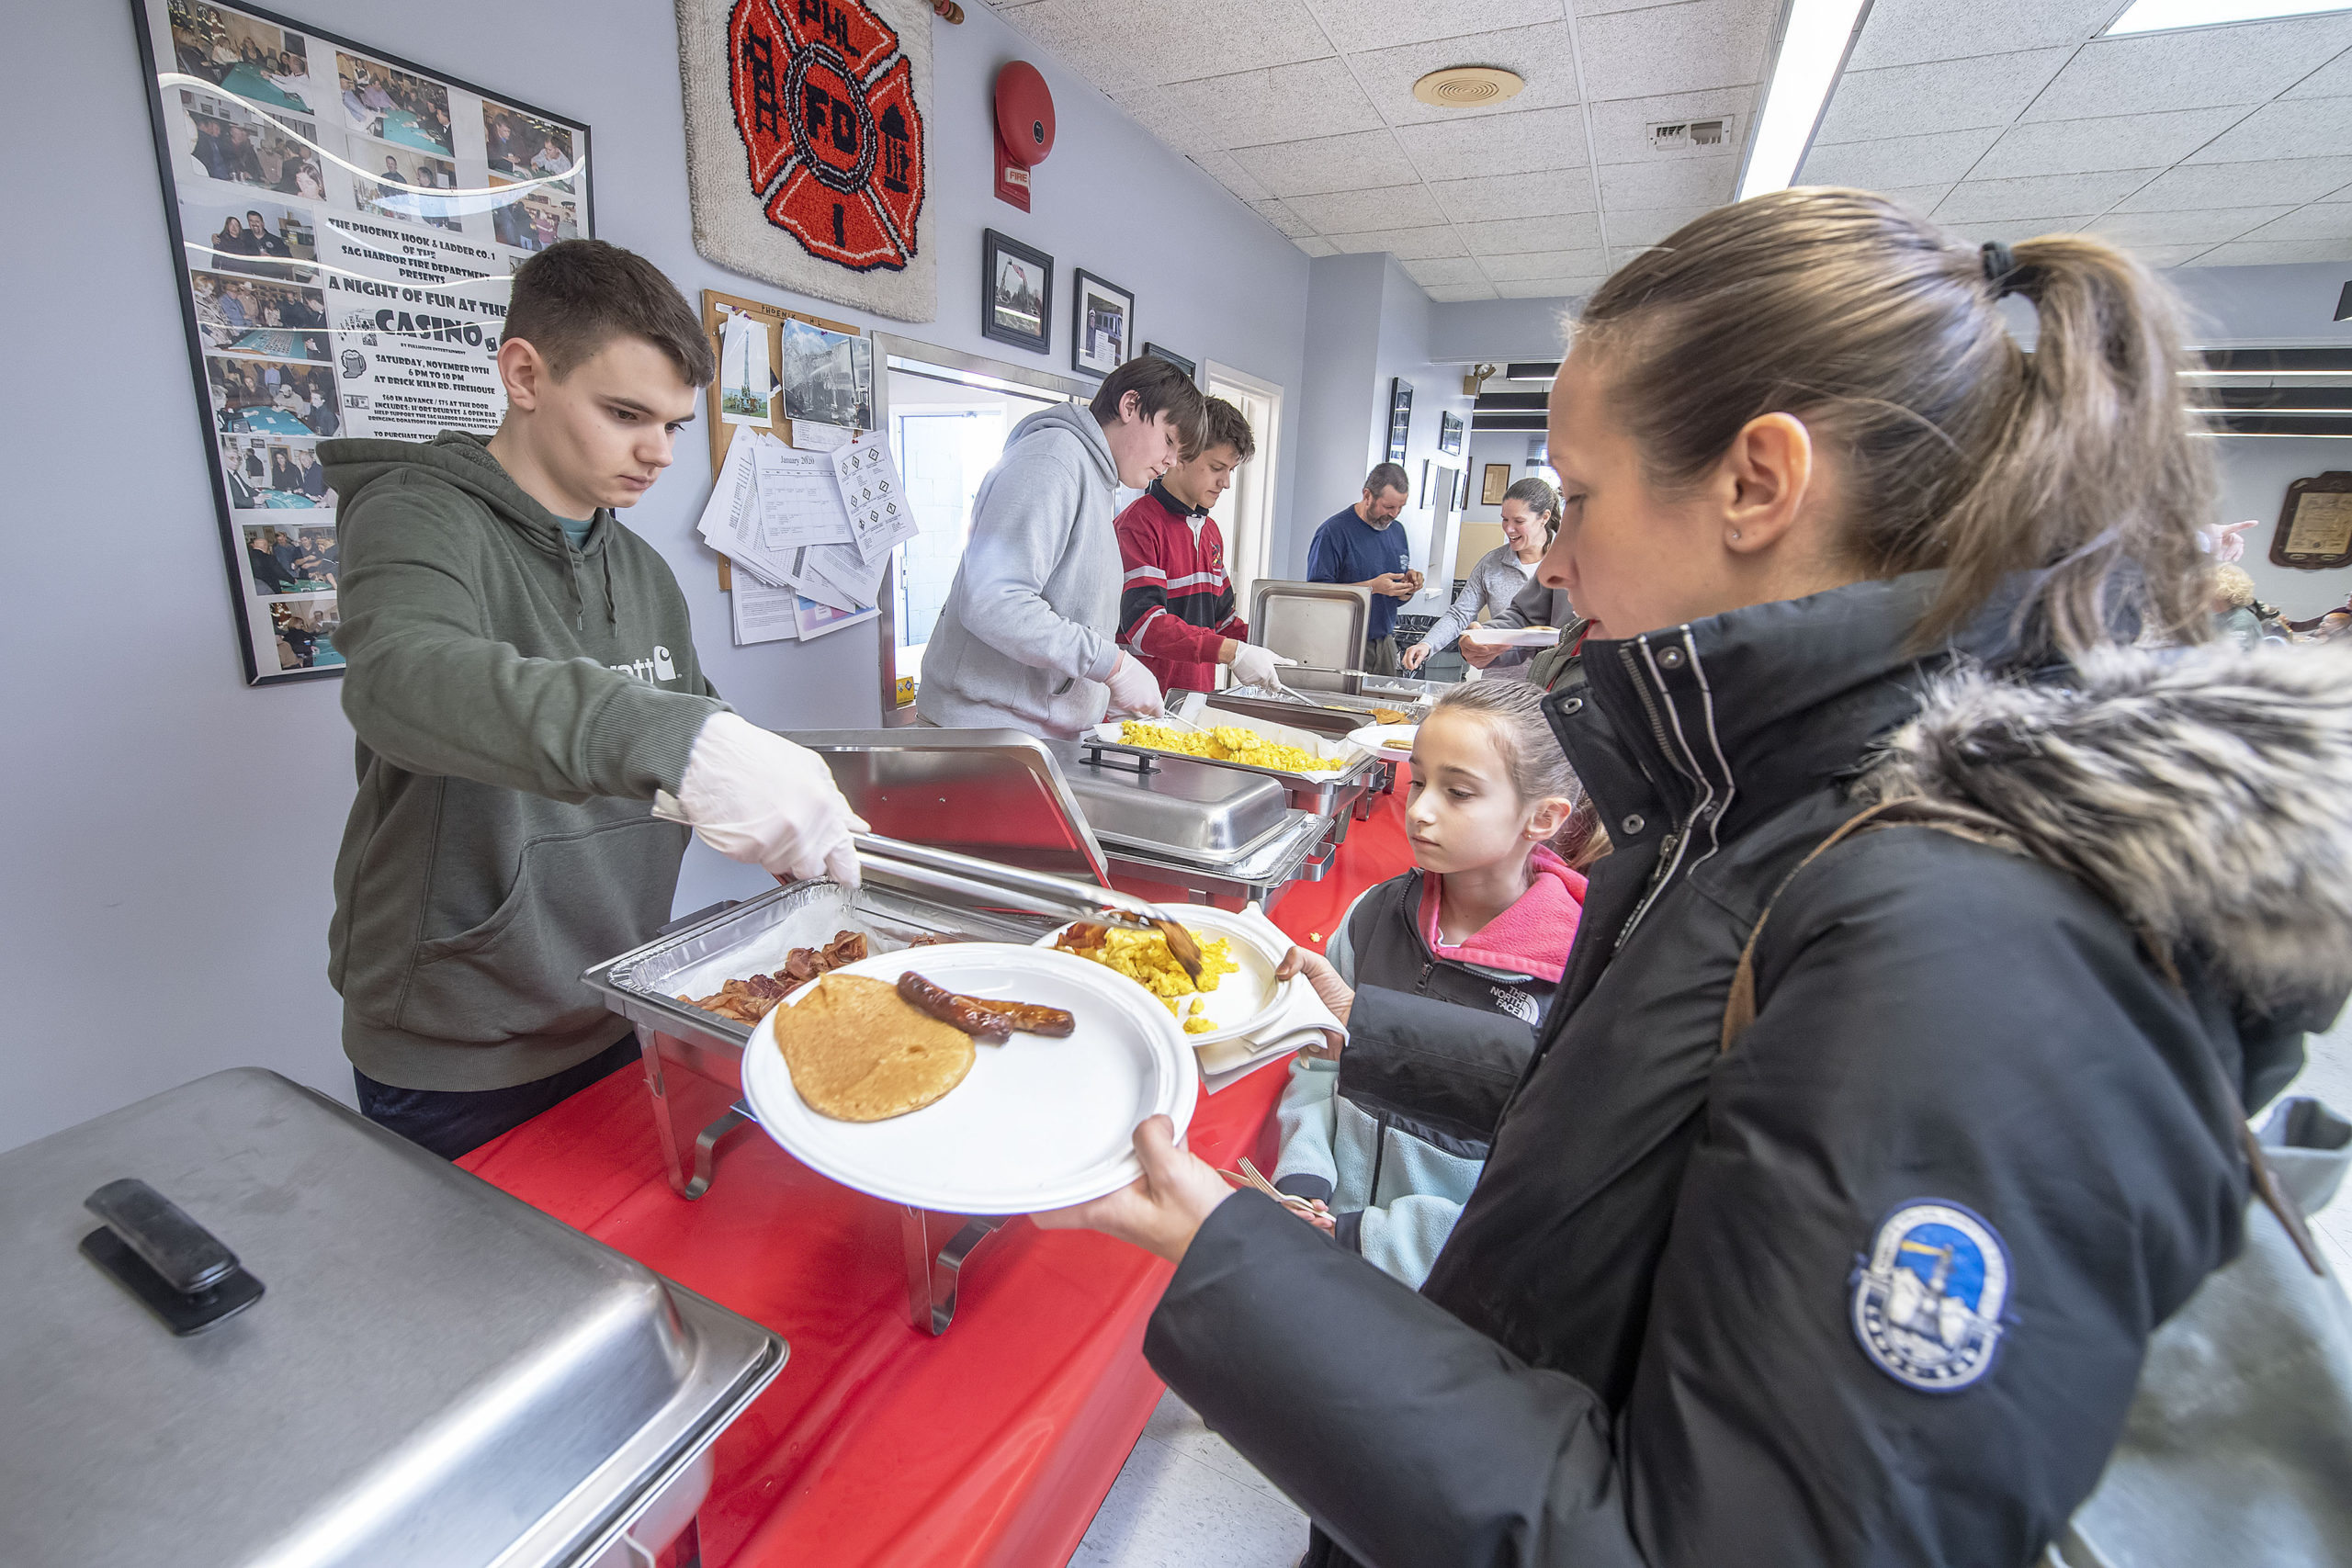 J.J. Murray serves up hash browns as his pals Colby Wilson and Truman Yardley handle the pancakes, eggs, sausage and bacon duities during the Pancake Breakfast held to benefit the Pierson Robotics Team at the Sag Harbor Fire Department firehouse on Sunday.   MICHAEL HELLER